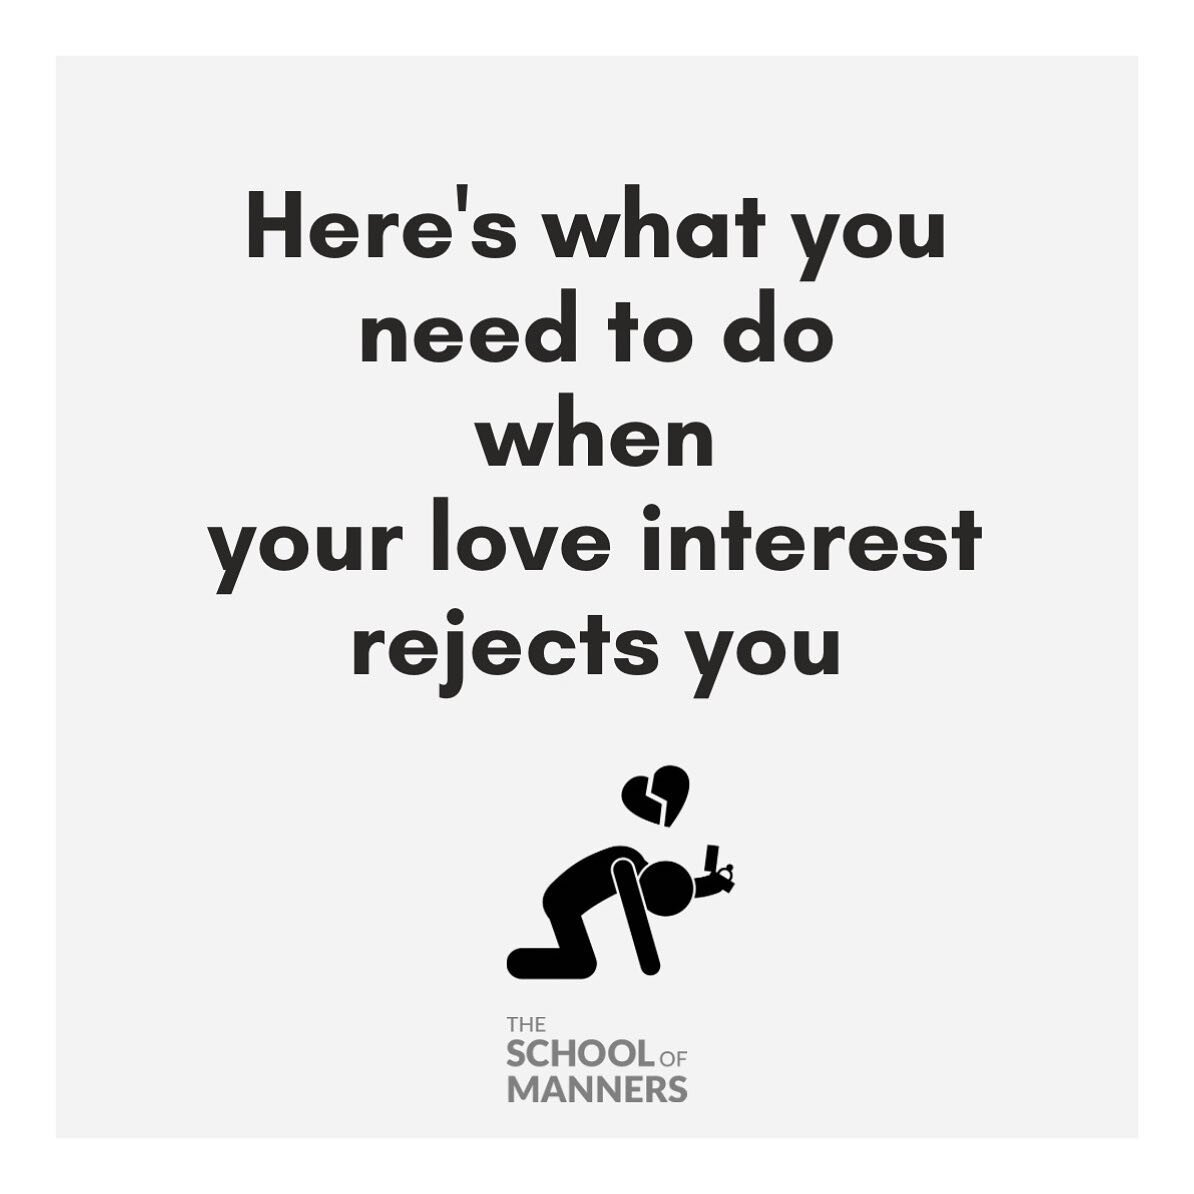 We've all been rejected at one point or another &mdash; whether it be from a new love interest, a job we applied to, a group of friends&hellip;Whichever kind of rejection you're facing, the fact of the matter is that 𝐫𝐞𝐣𝐞𝐜𝐭𝐢𝐨𝐧 𝐡𝐮𝐫𝐭𝐬⁣
⁣
